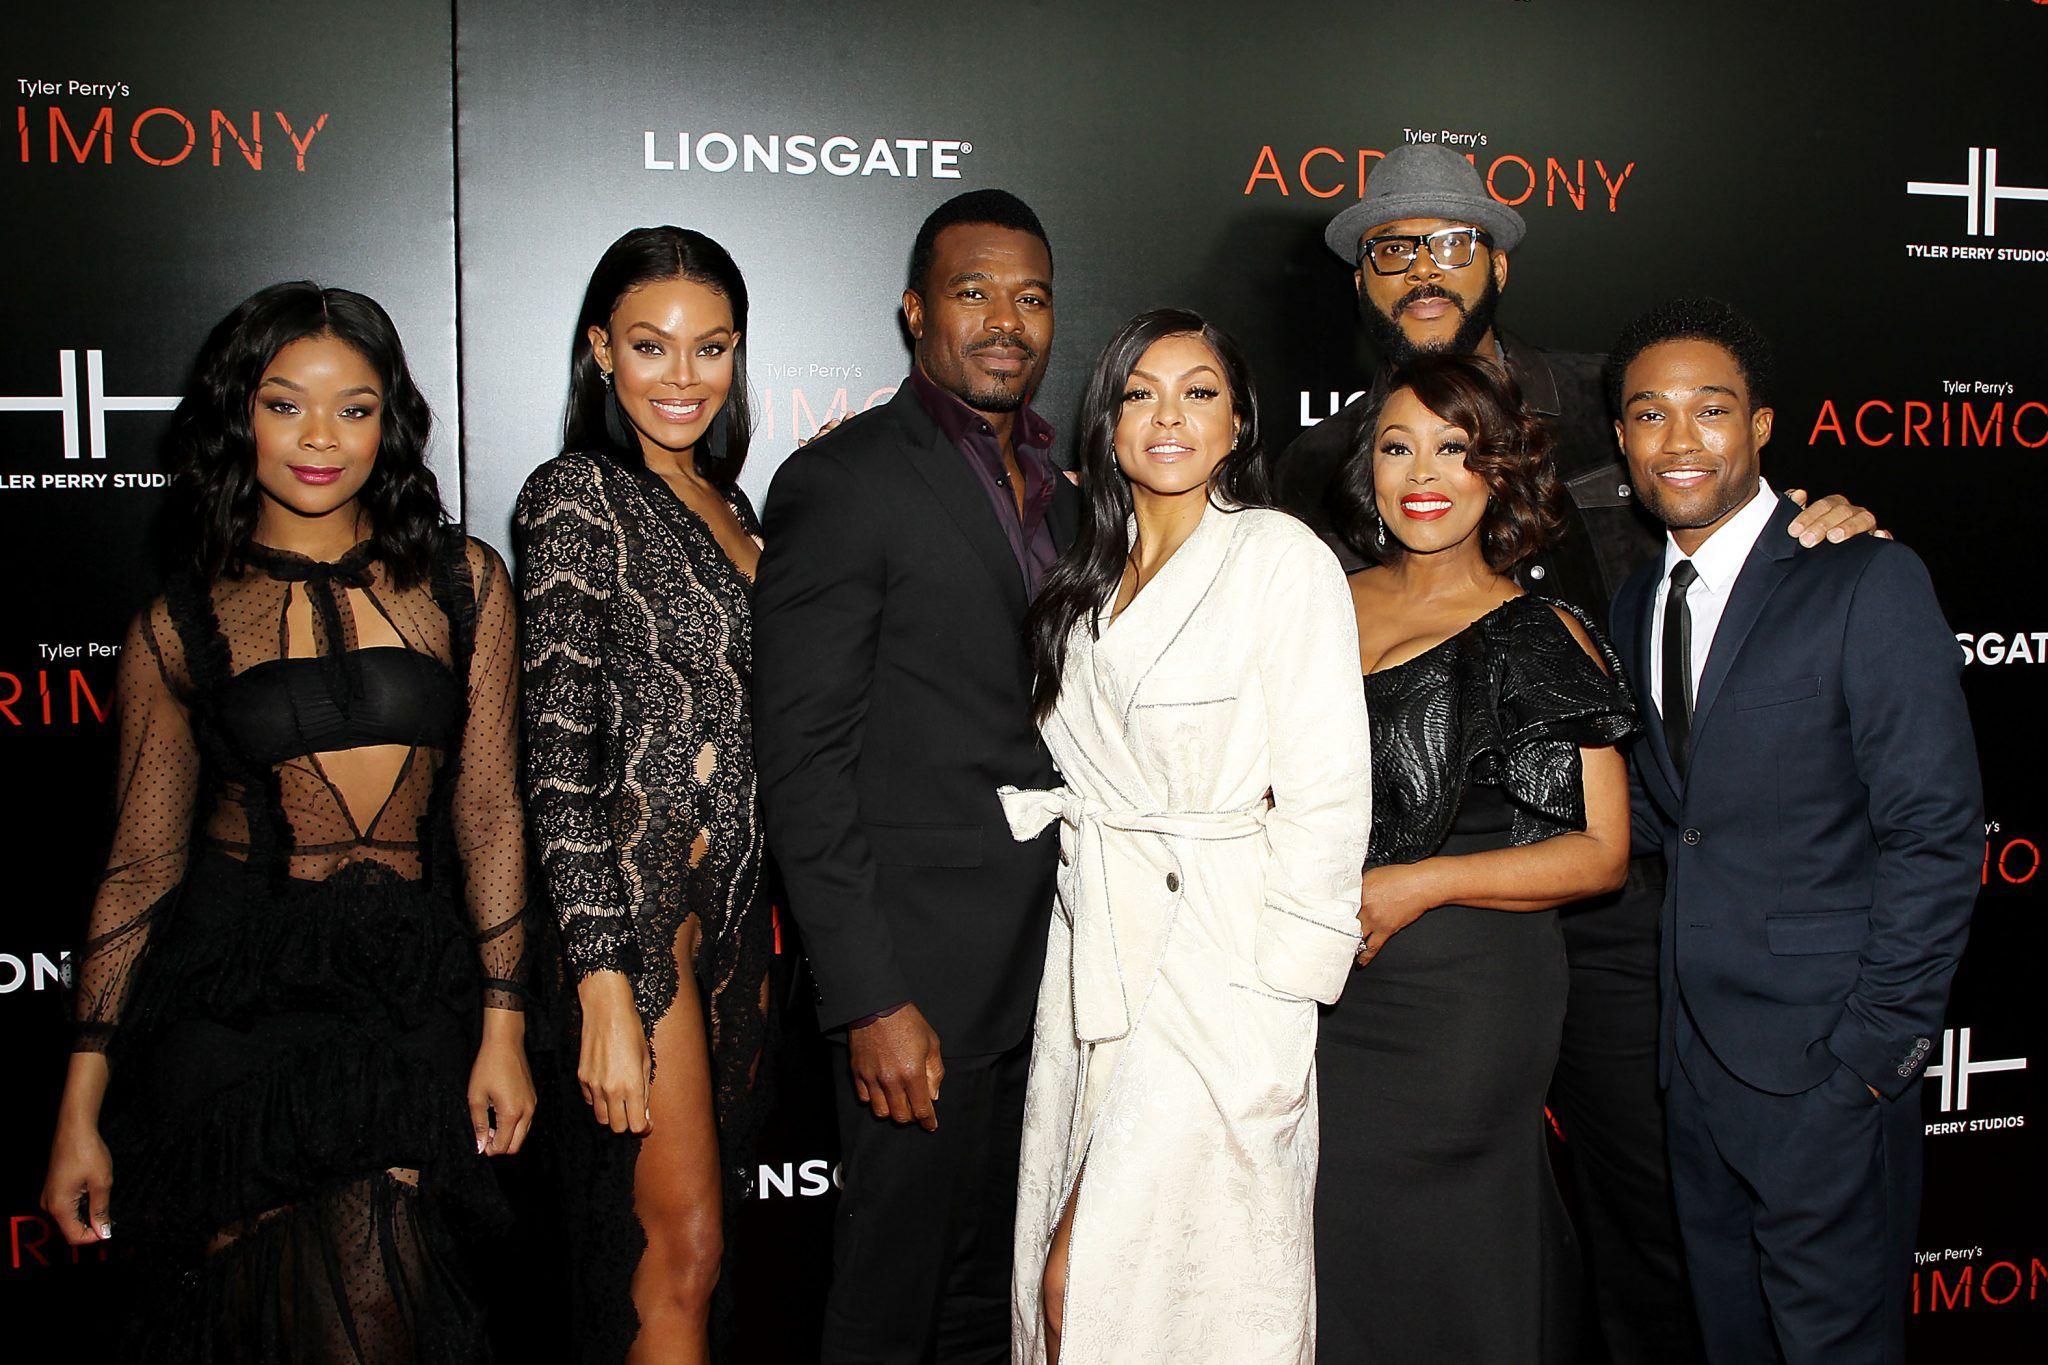 Tyler Perry's Acrimony World Premiere In NYC With Tami